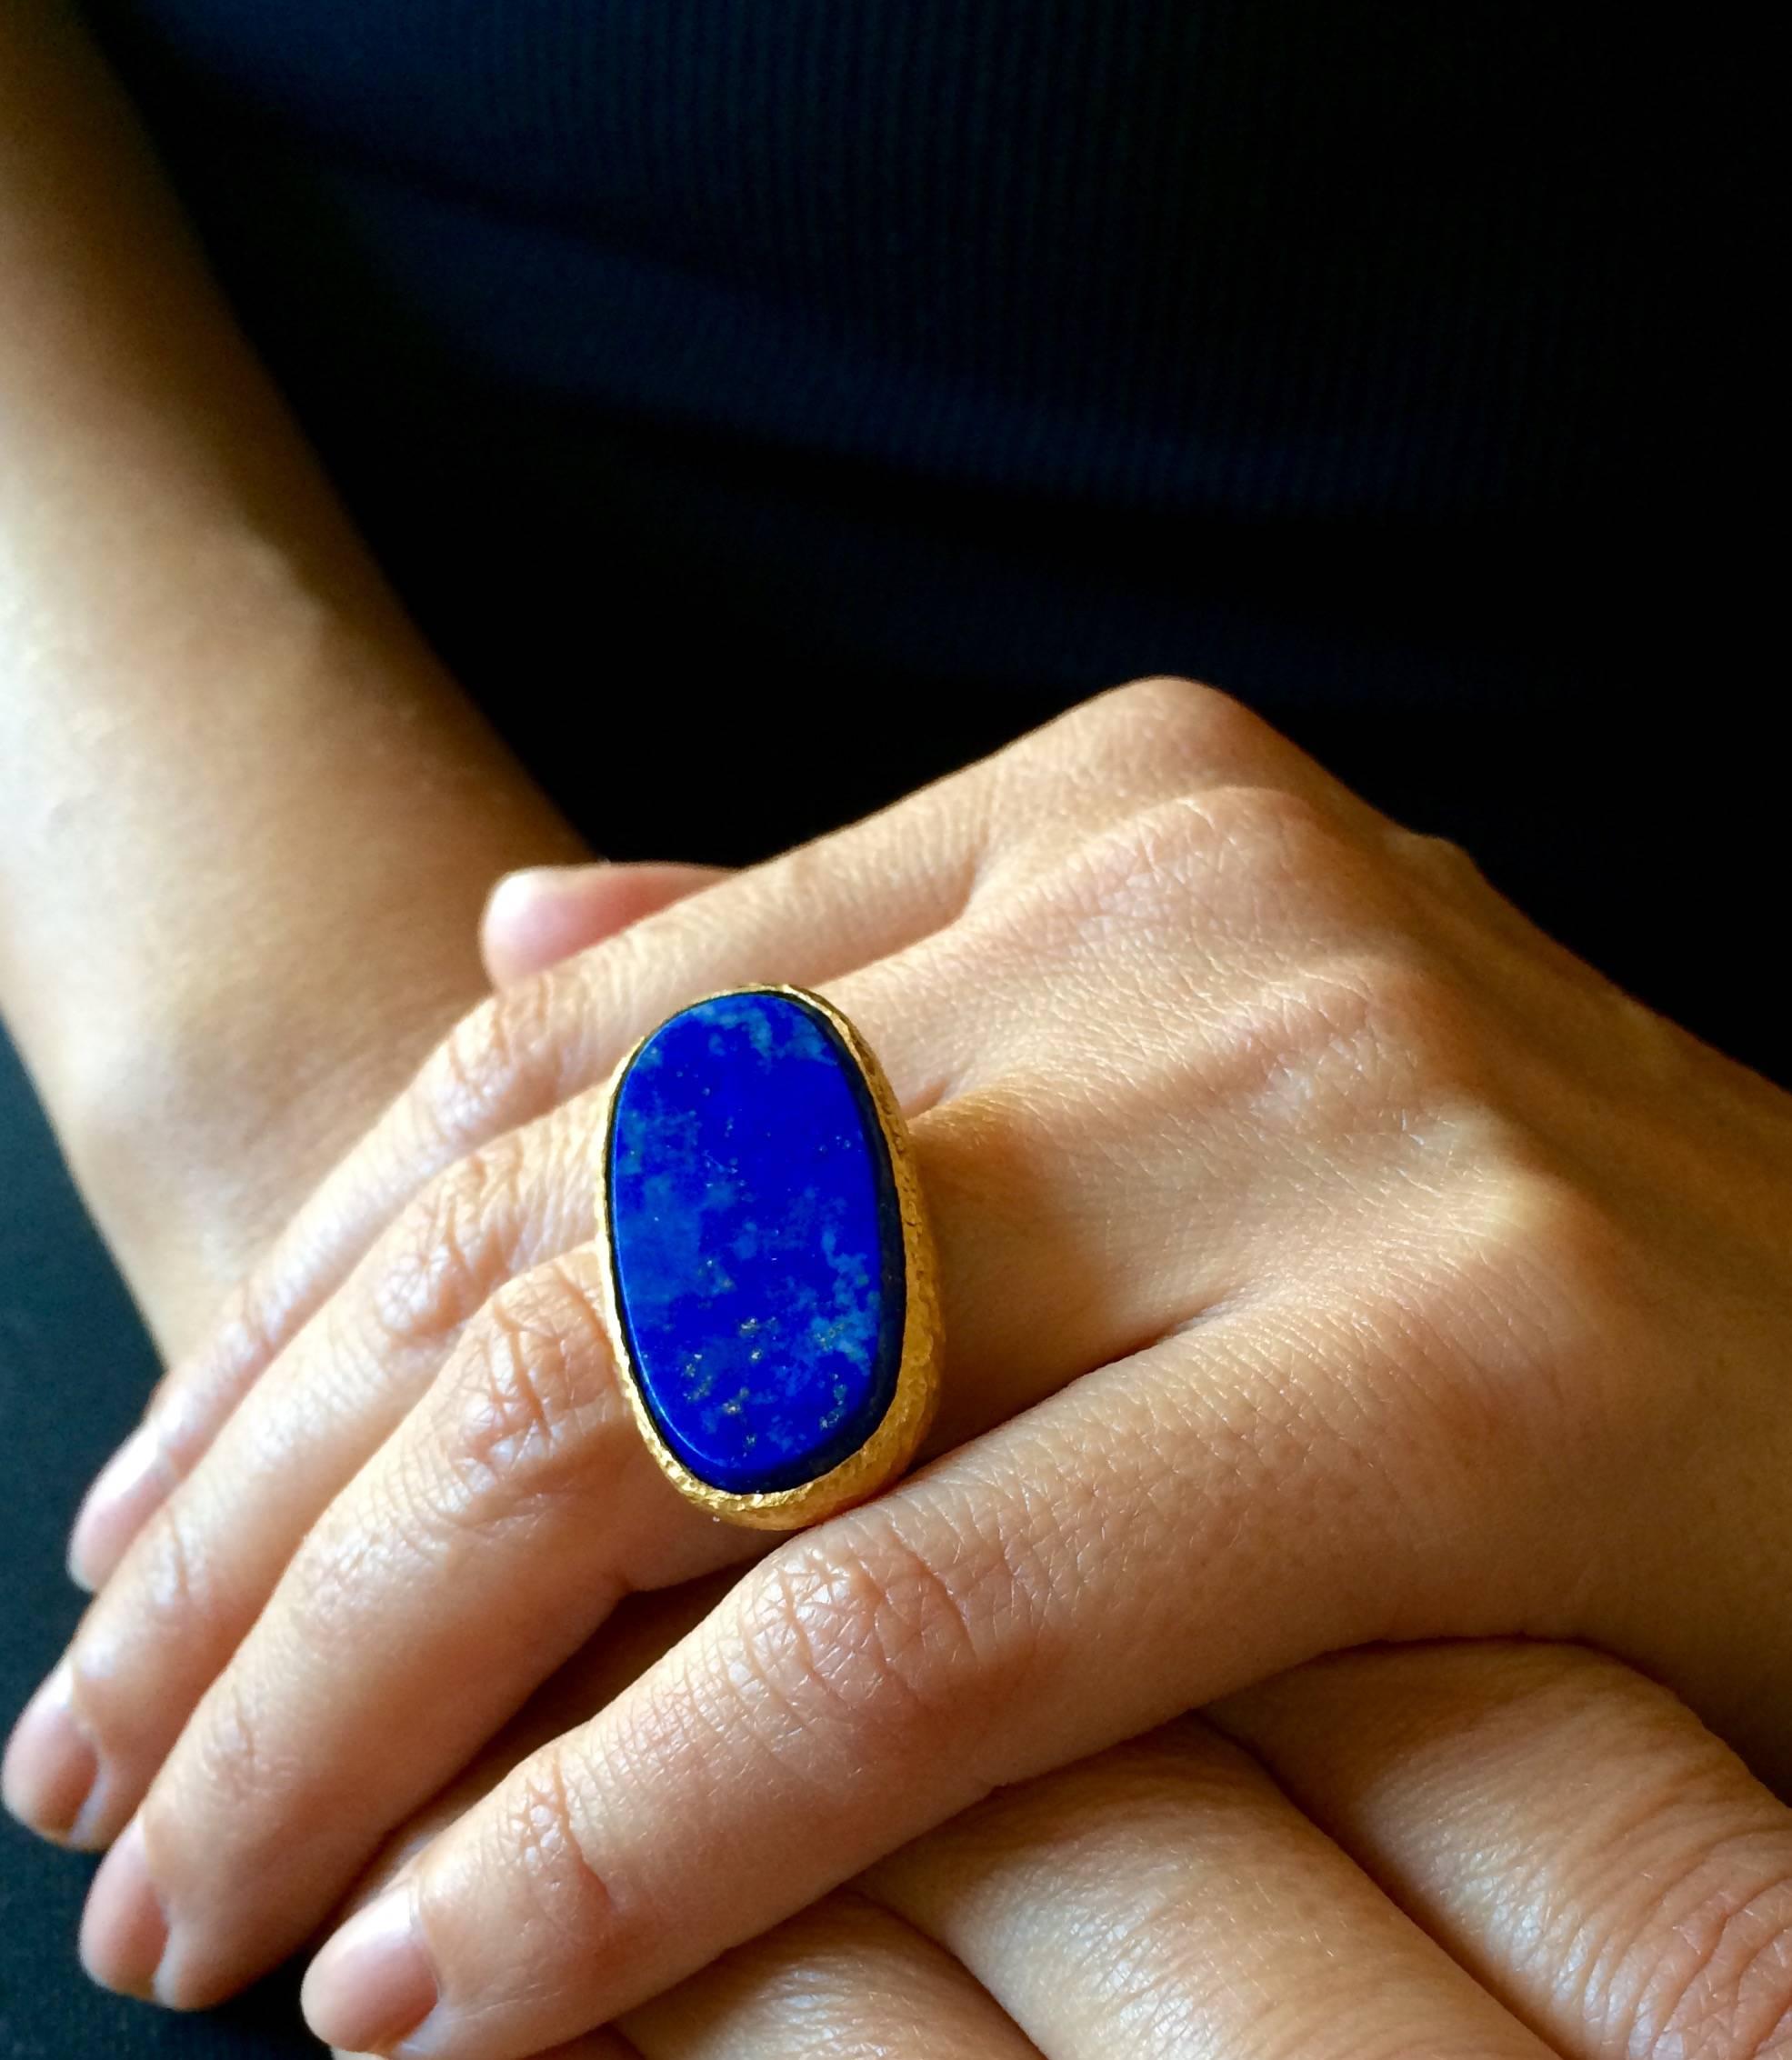 Large Oval Lapis Lazuli Stone In Hand Hammered Gold Ring By Marina J. 2016 2